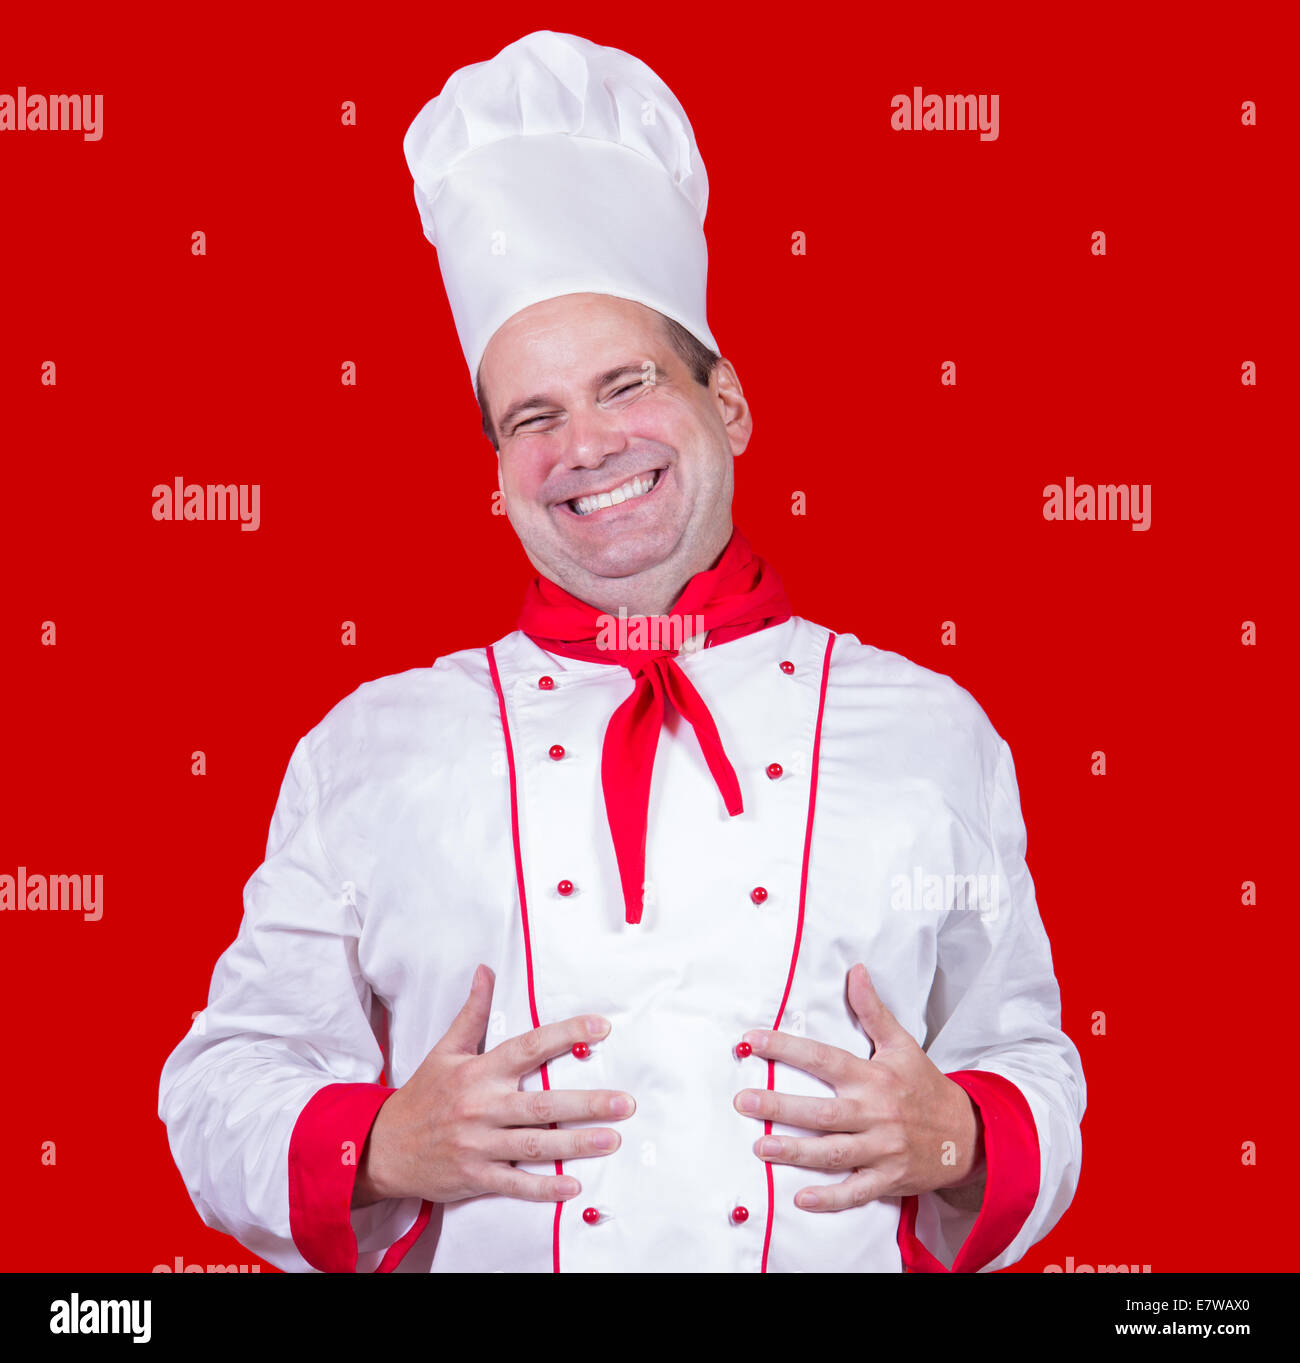 happy chef holding hands on his belly Stock Photo